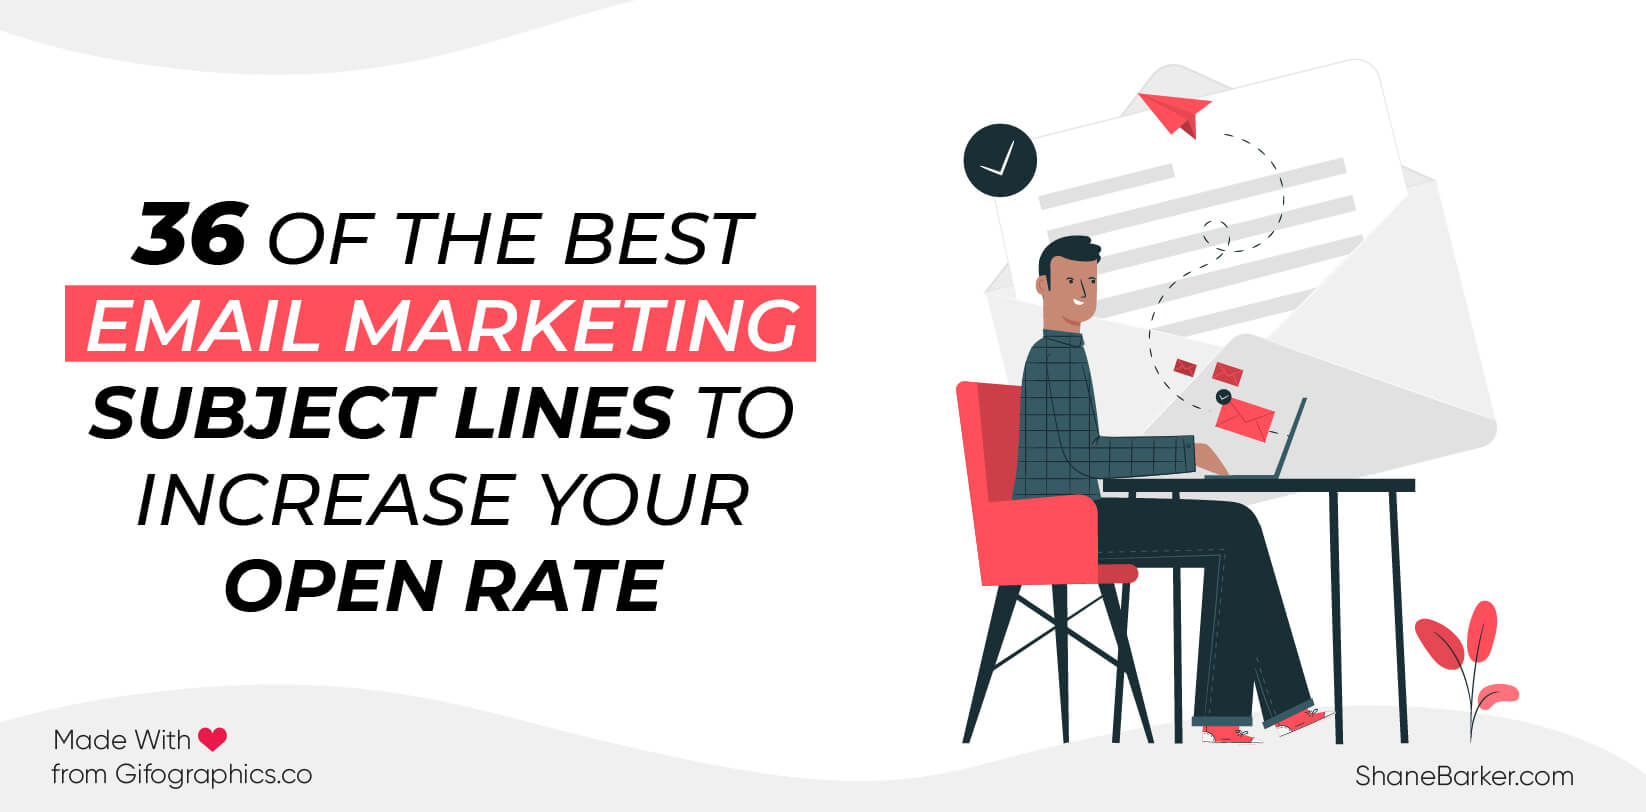 36 of the Best Email Marketing Subject lines to Increase Your Open Rate